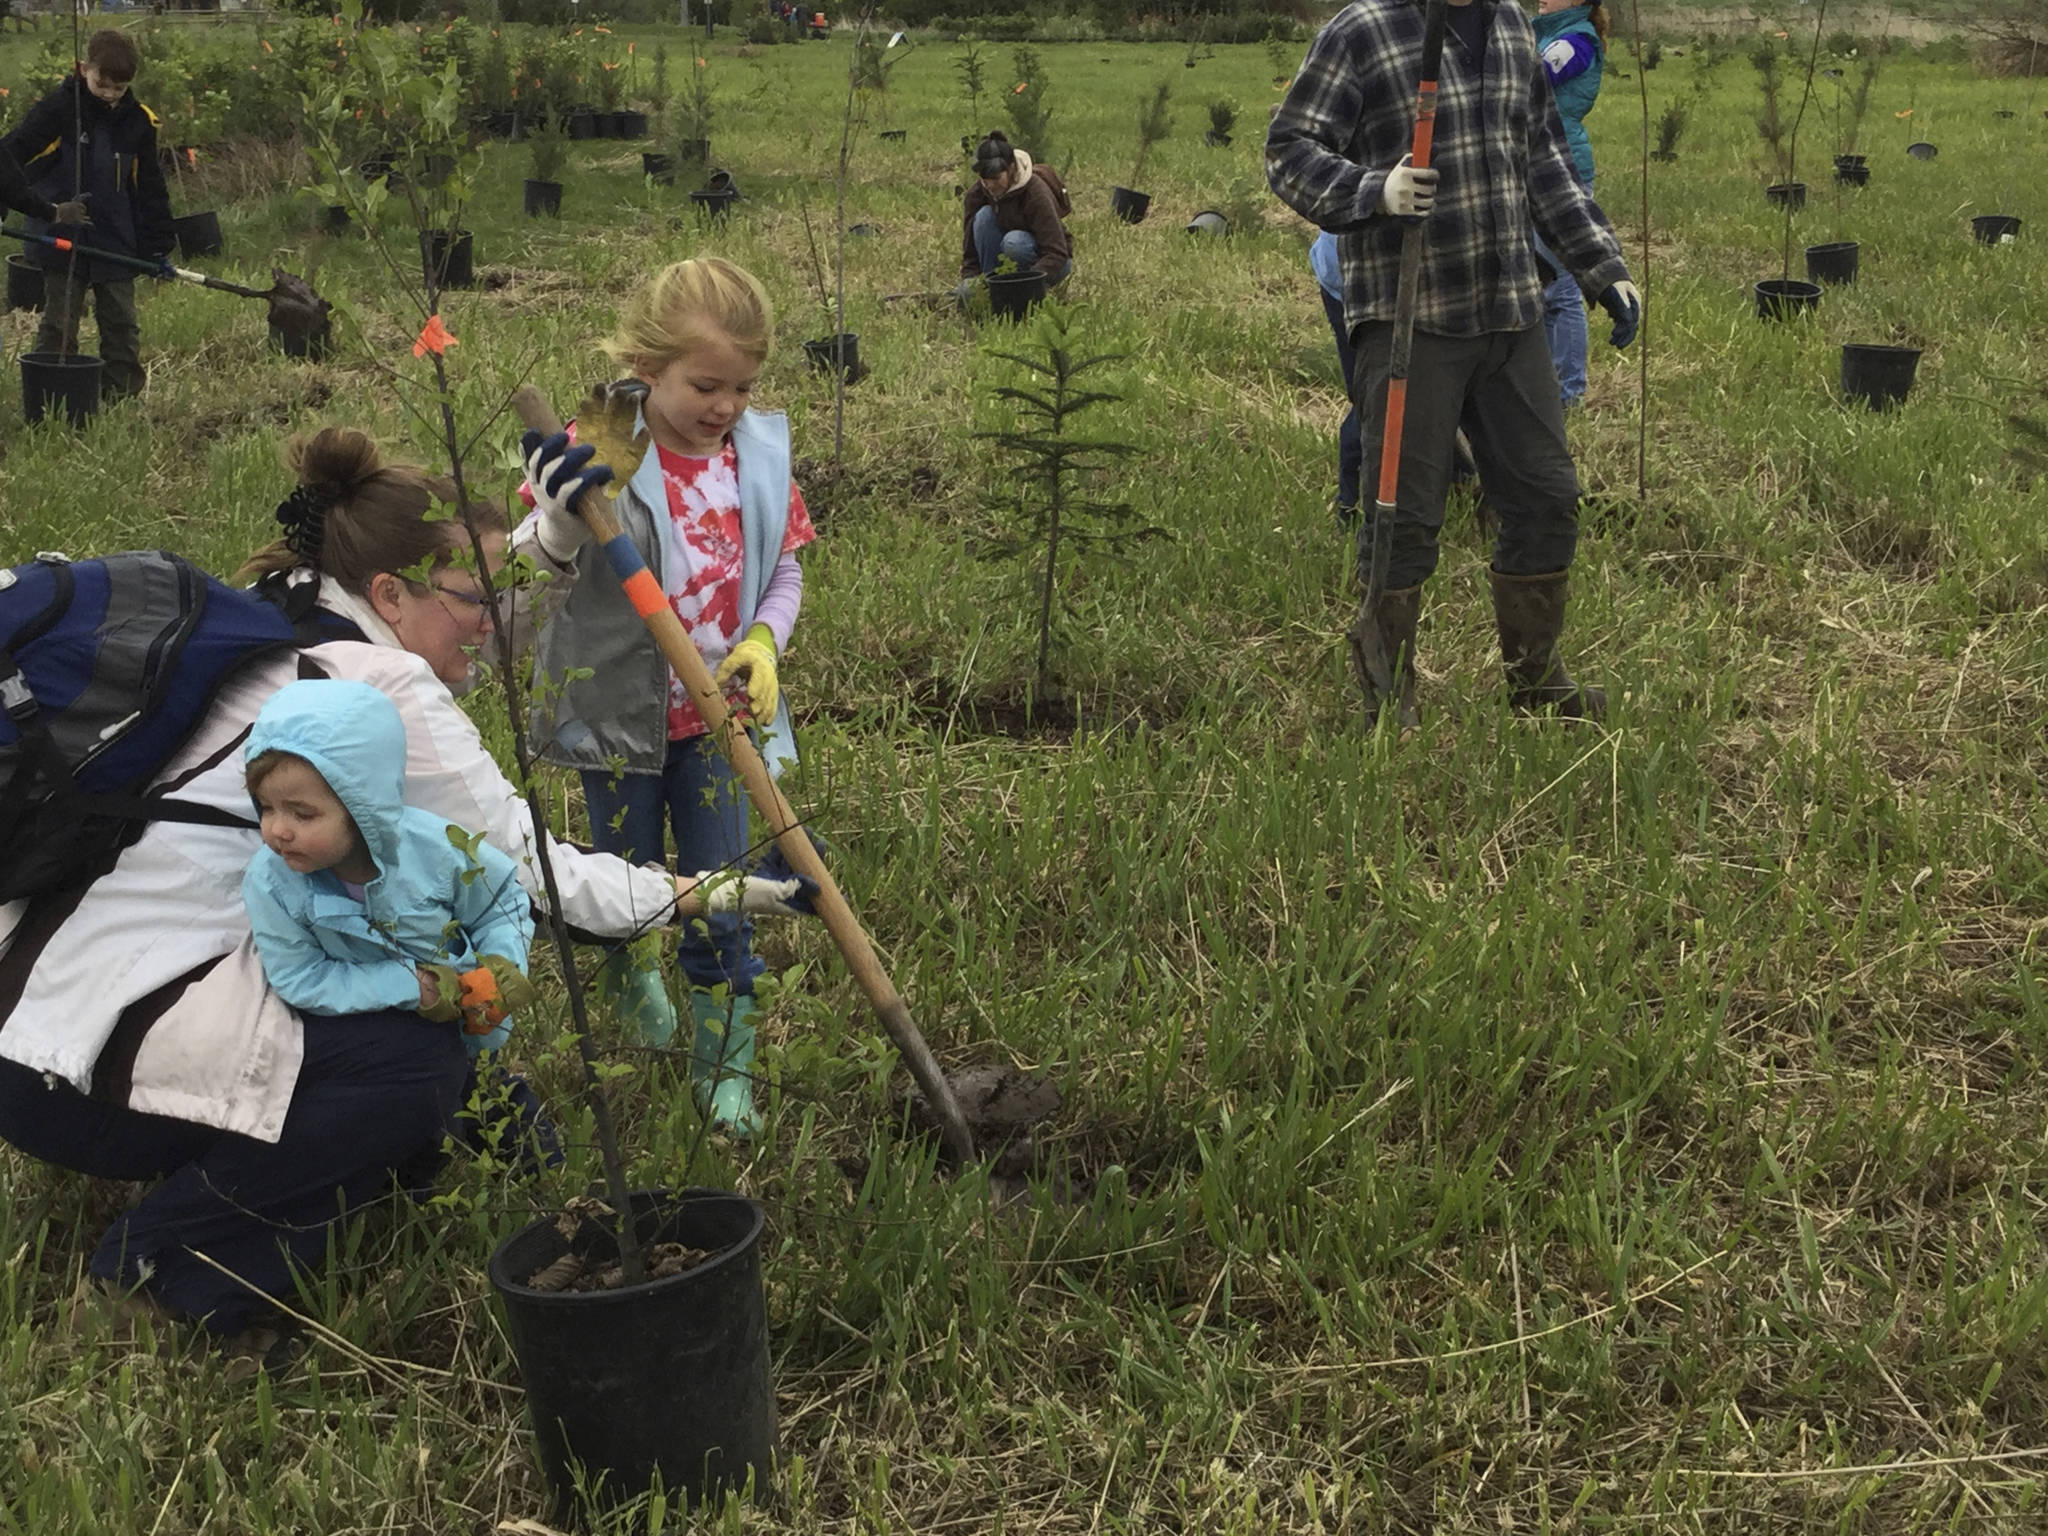 Arlington, Marysville team up for Earth Day planting event for Edgecomb Creek